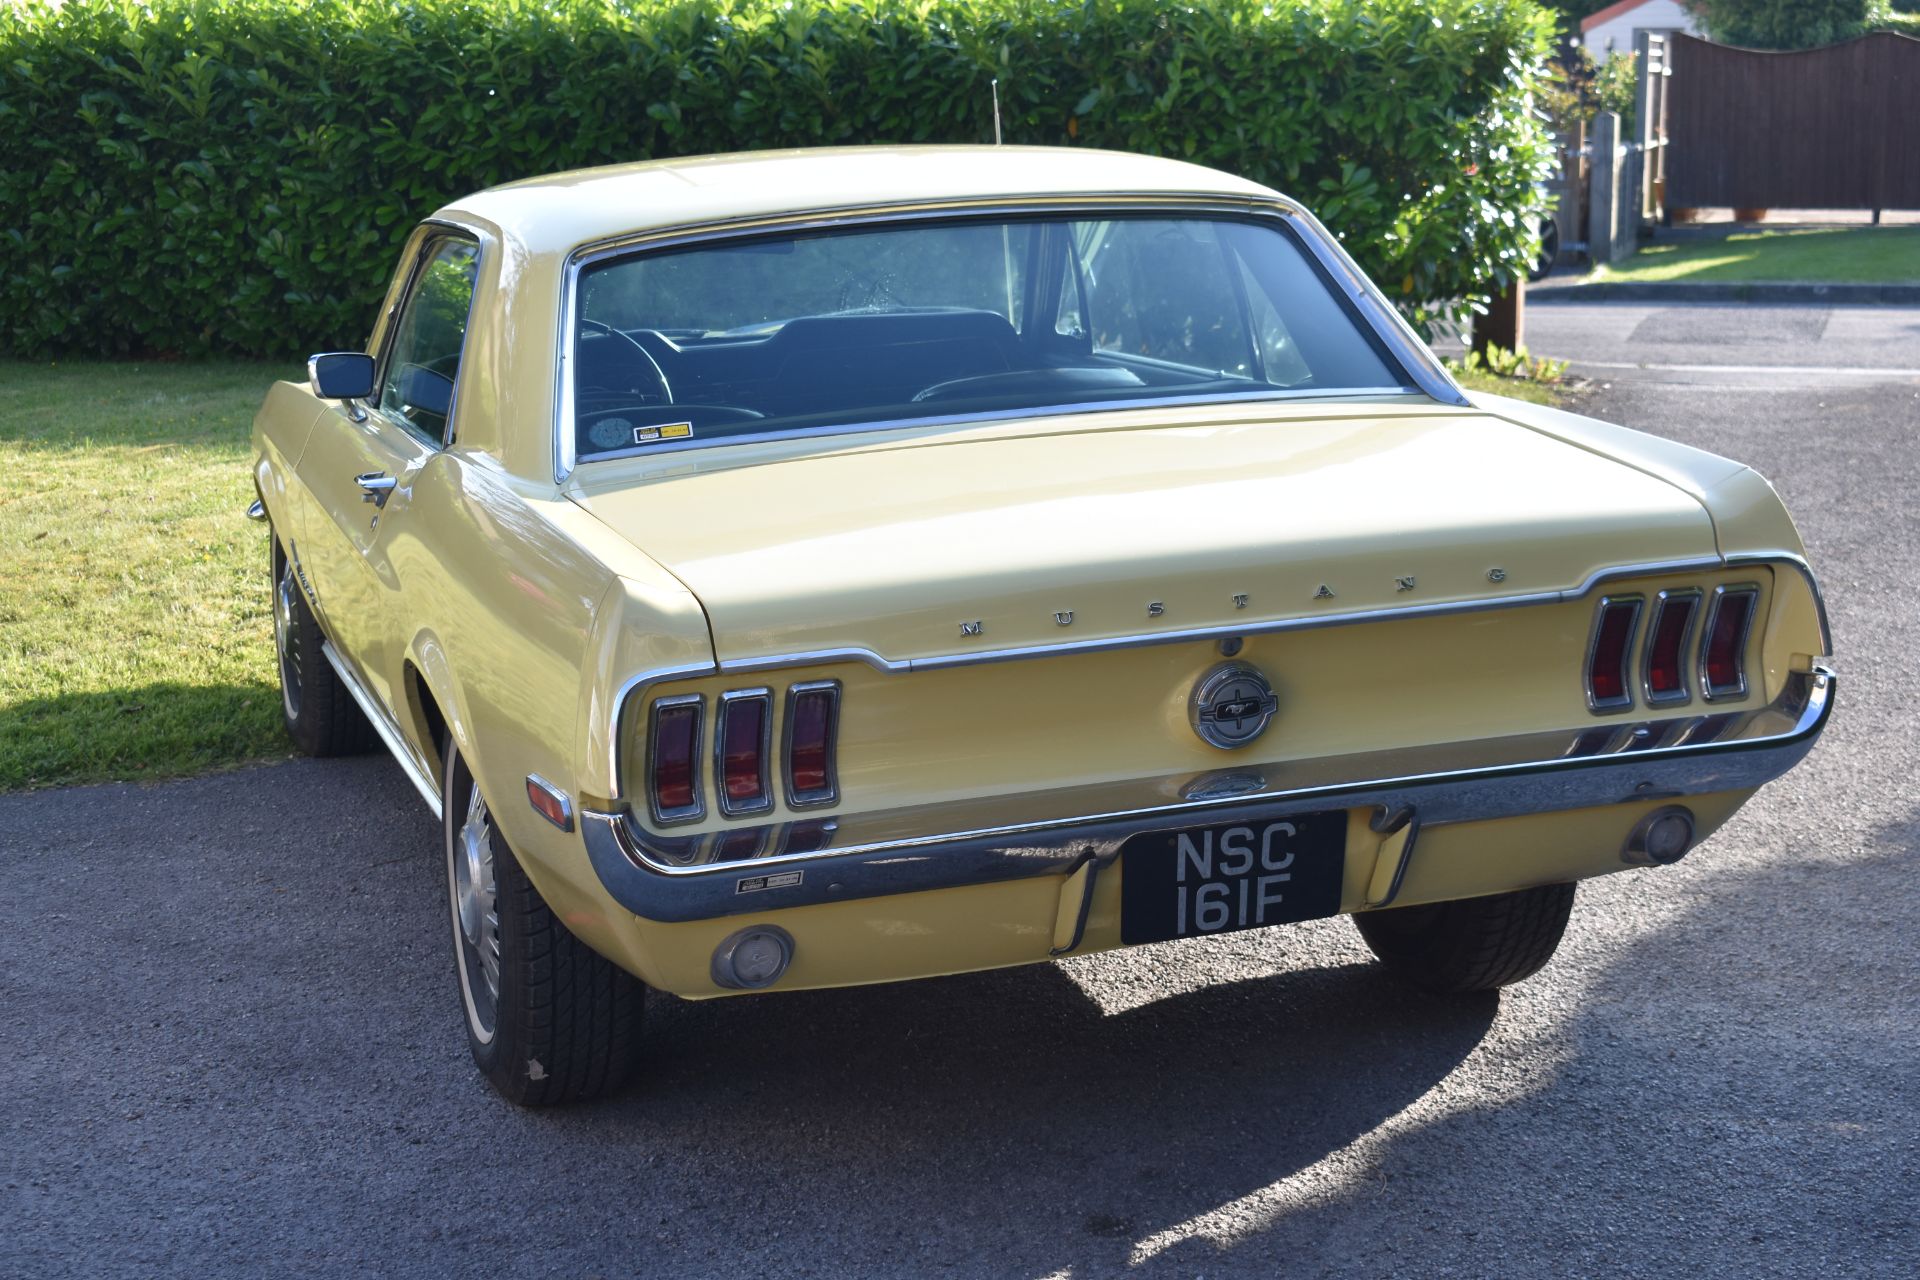 A 1968 Ford Mustang coupé 289 V8, registration number NSC 161F, chassis number 8R01C150713, engine